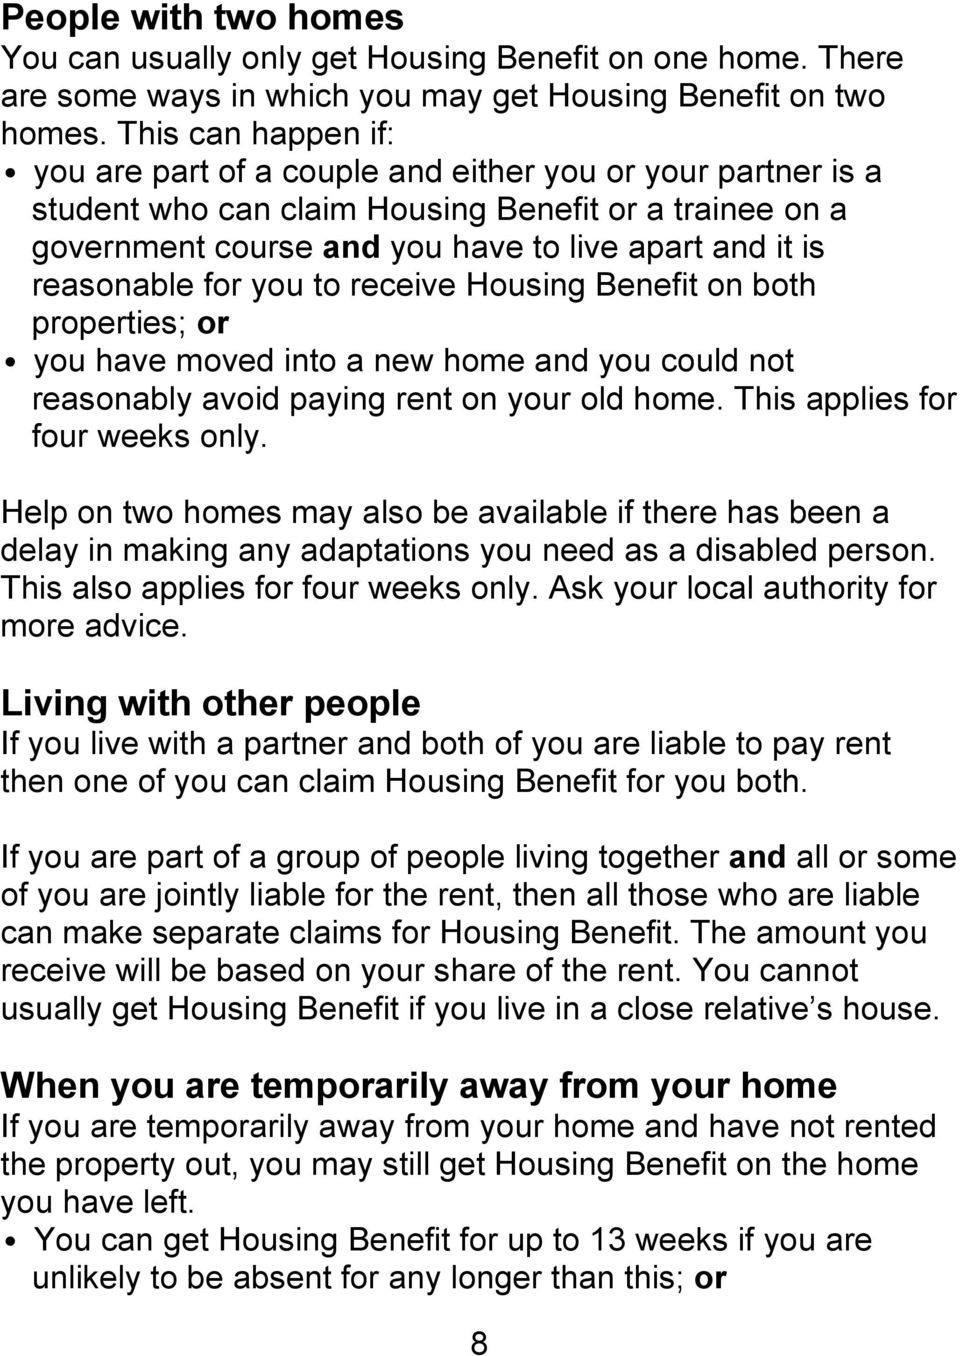 reasonable for you to receive Housing Benefit on both properties; or you have moved into a new home and you could not reasonably avoid paying rent on your old home. This applies for four weeks only.